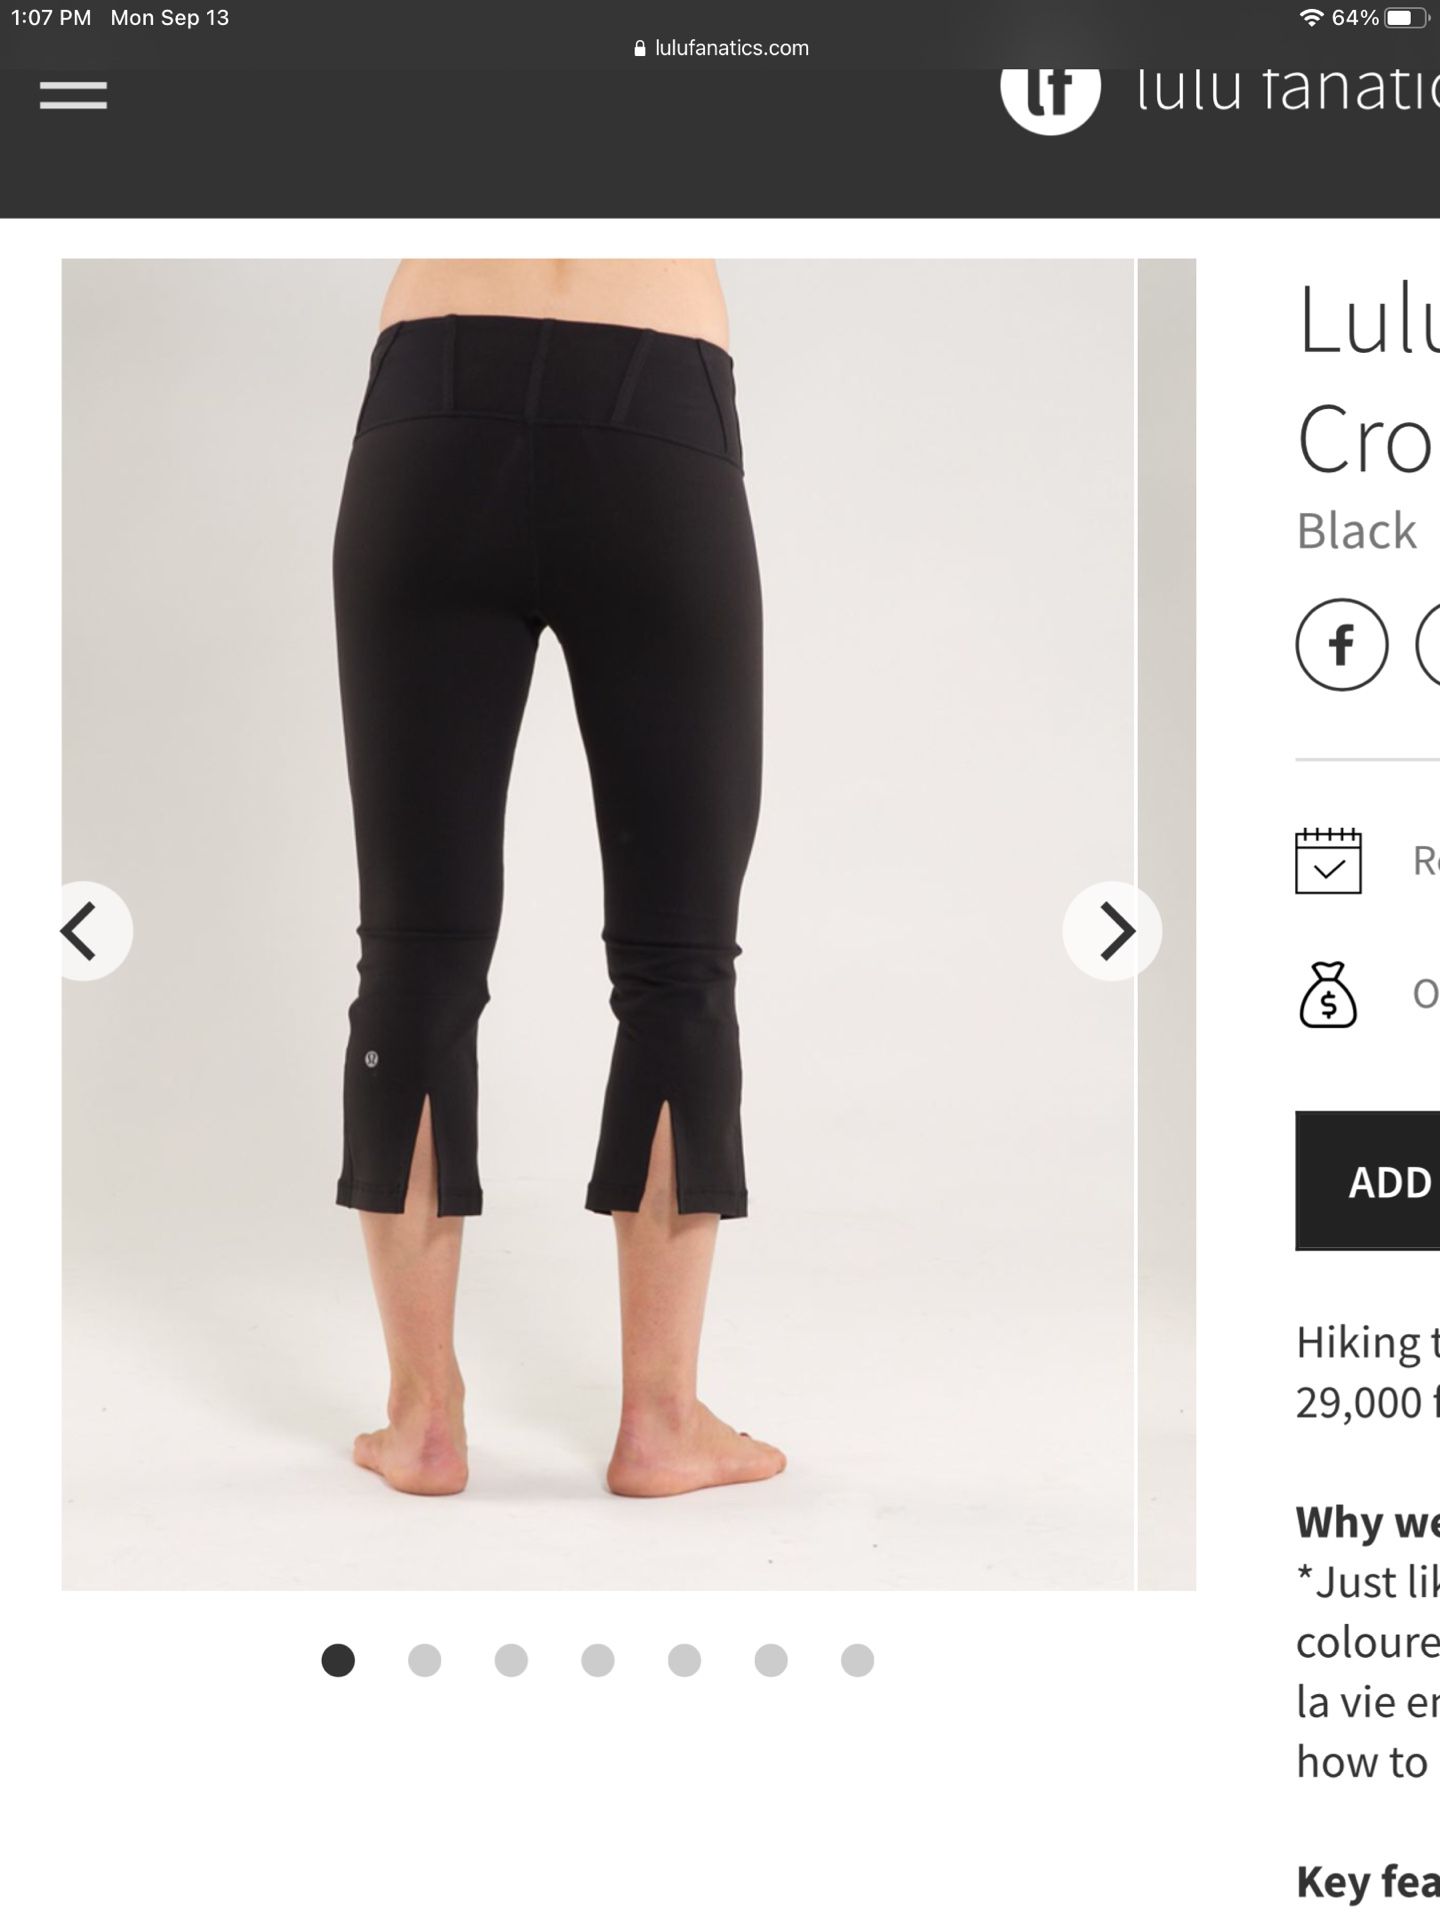 Lululemon Tadasana Slit Crop cropped leggings workout pants size 6 fair condition made with breathable, four-way stretch luon slit in the hem to free 